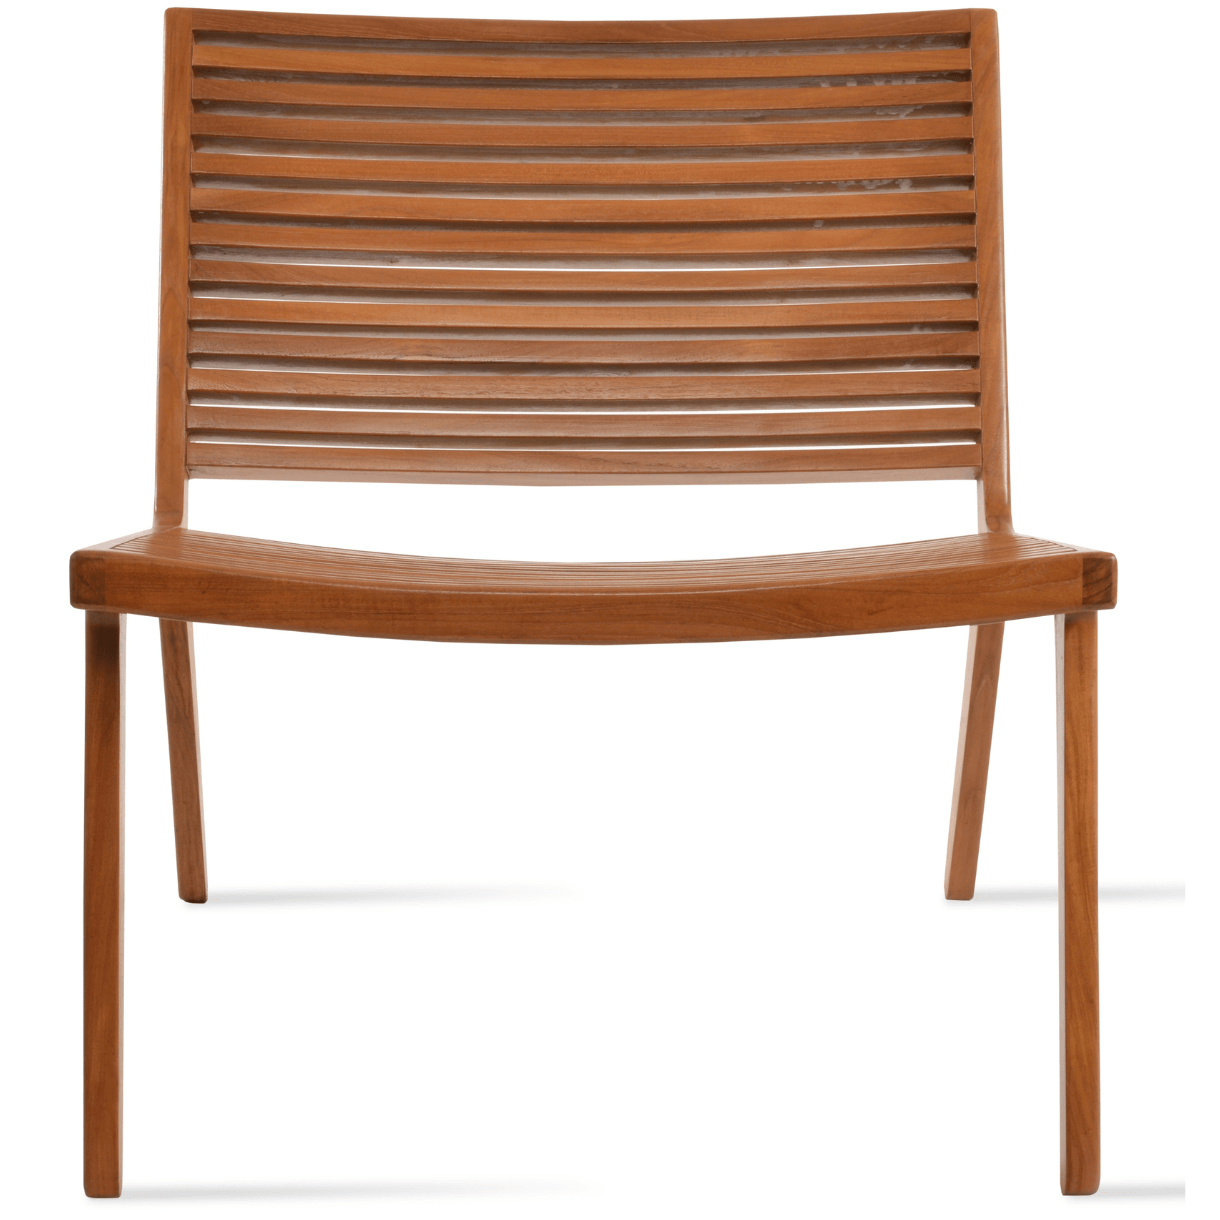 Wooden Lounge Chair Bali Teak Lounger - Your Bar Stools Canada